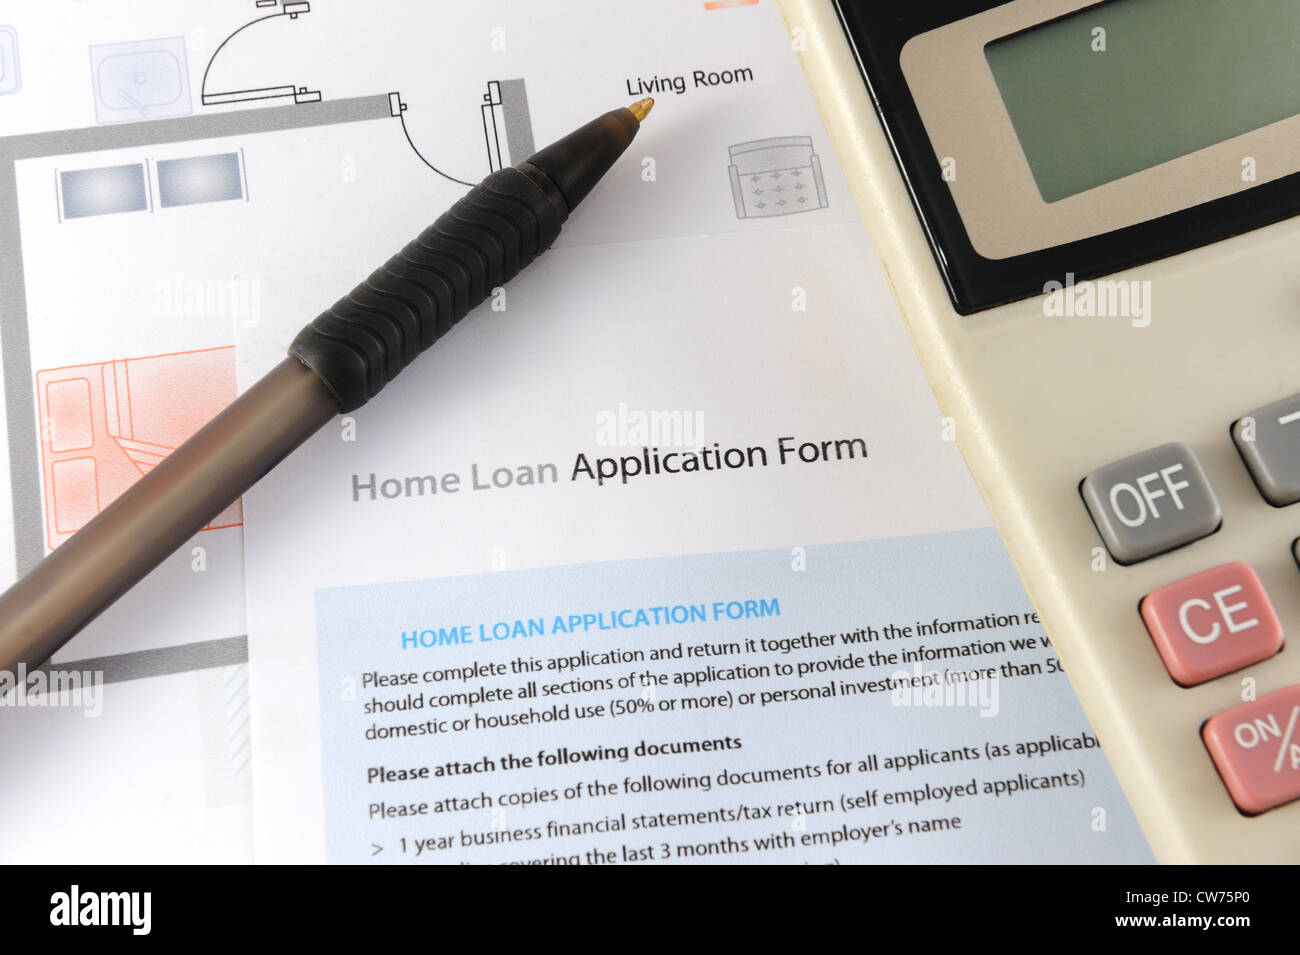 Home loan application form with calculator and pen nearby Stock Photo